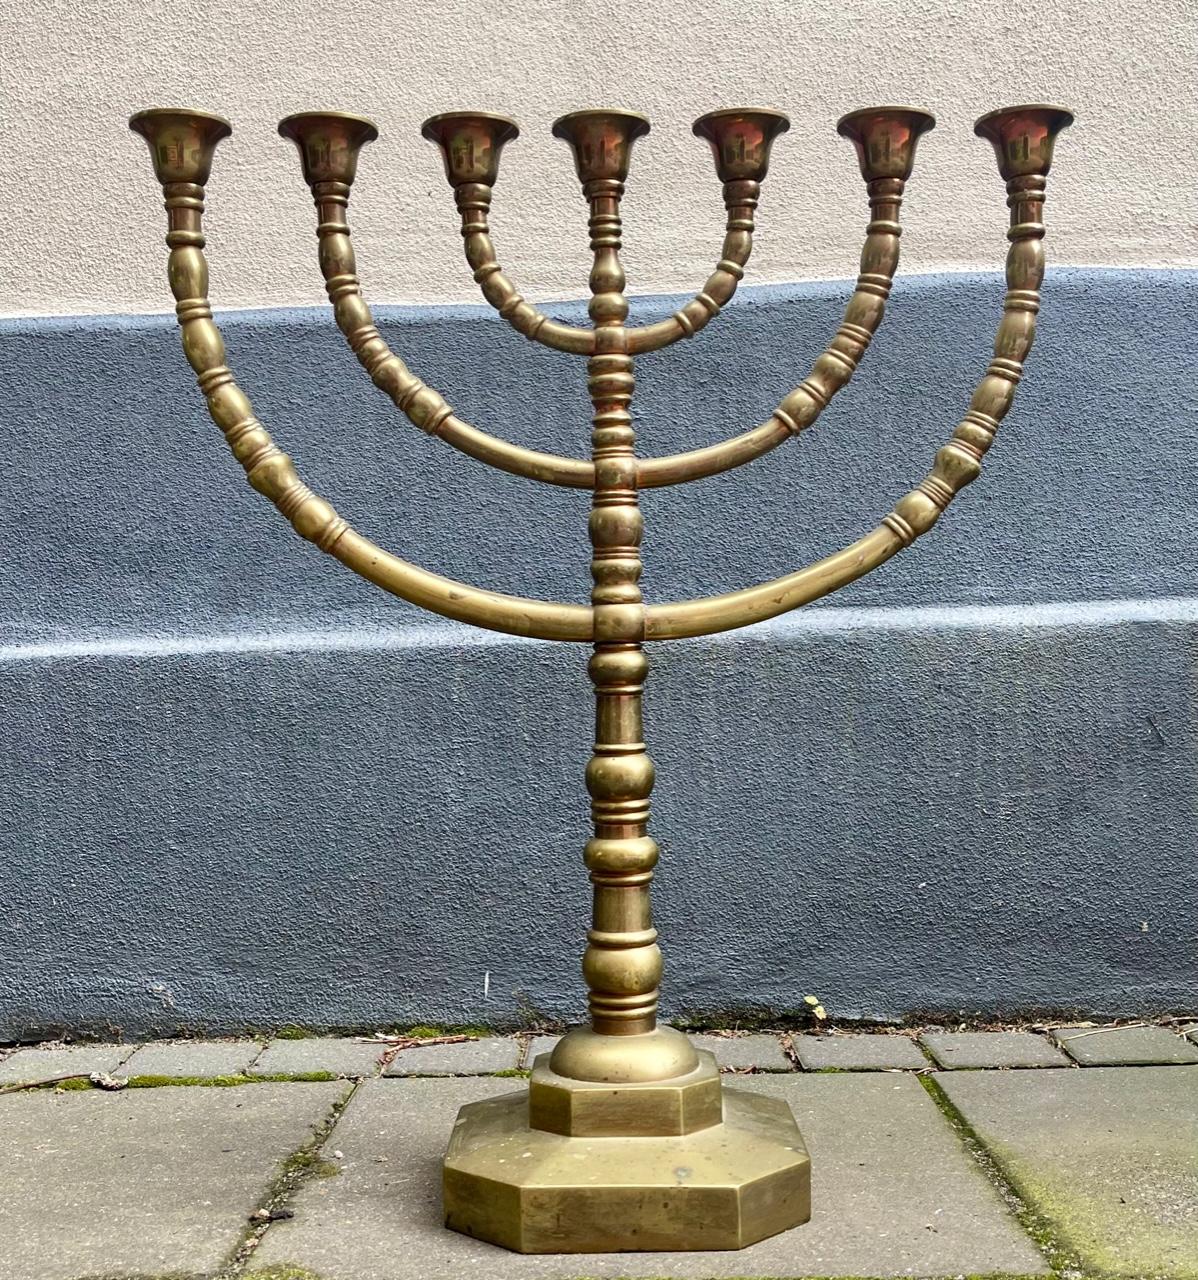 Weighing in around 15 kg this enormous candelabrum cast in solid brass measures 60 cm in heigh without candles. The width of the 7 arms is 52 cm. It was made in Germany during the 1920s and according to its previous owners it was used during